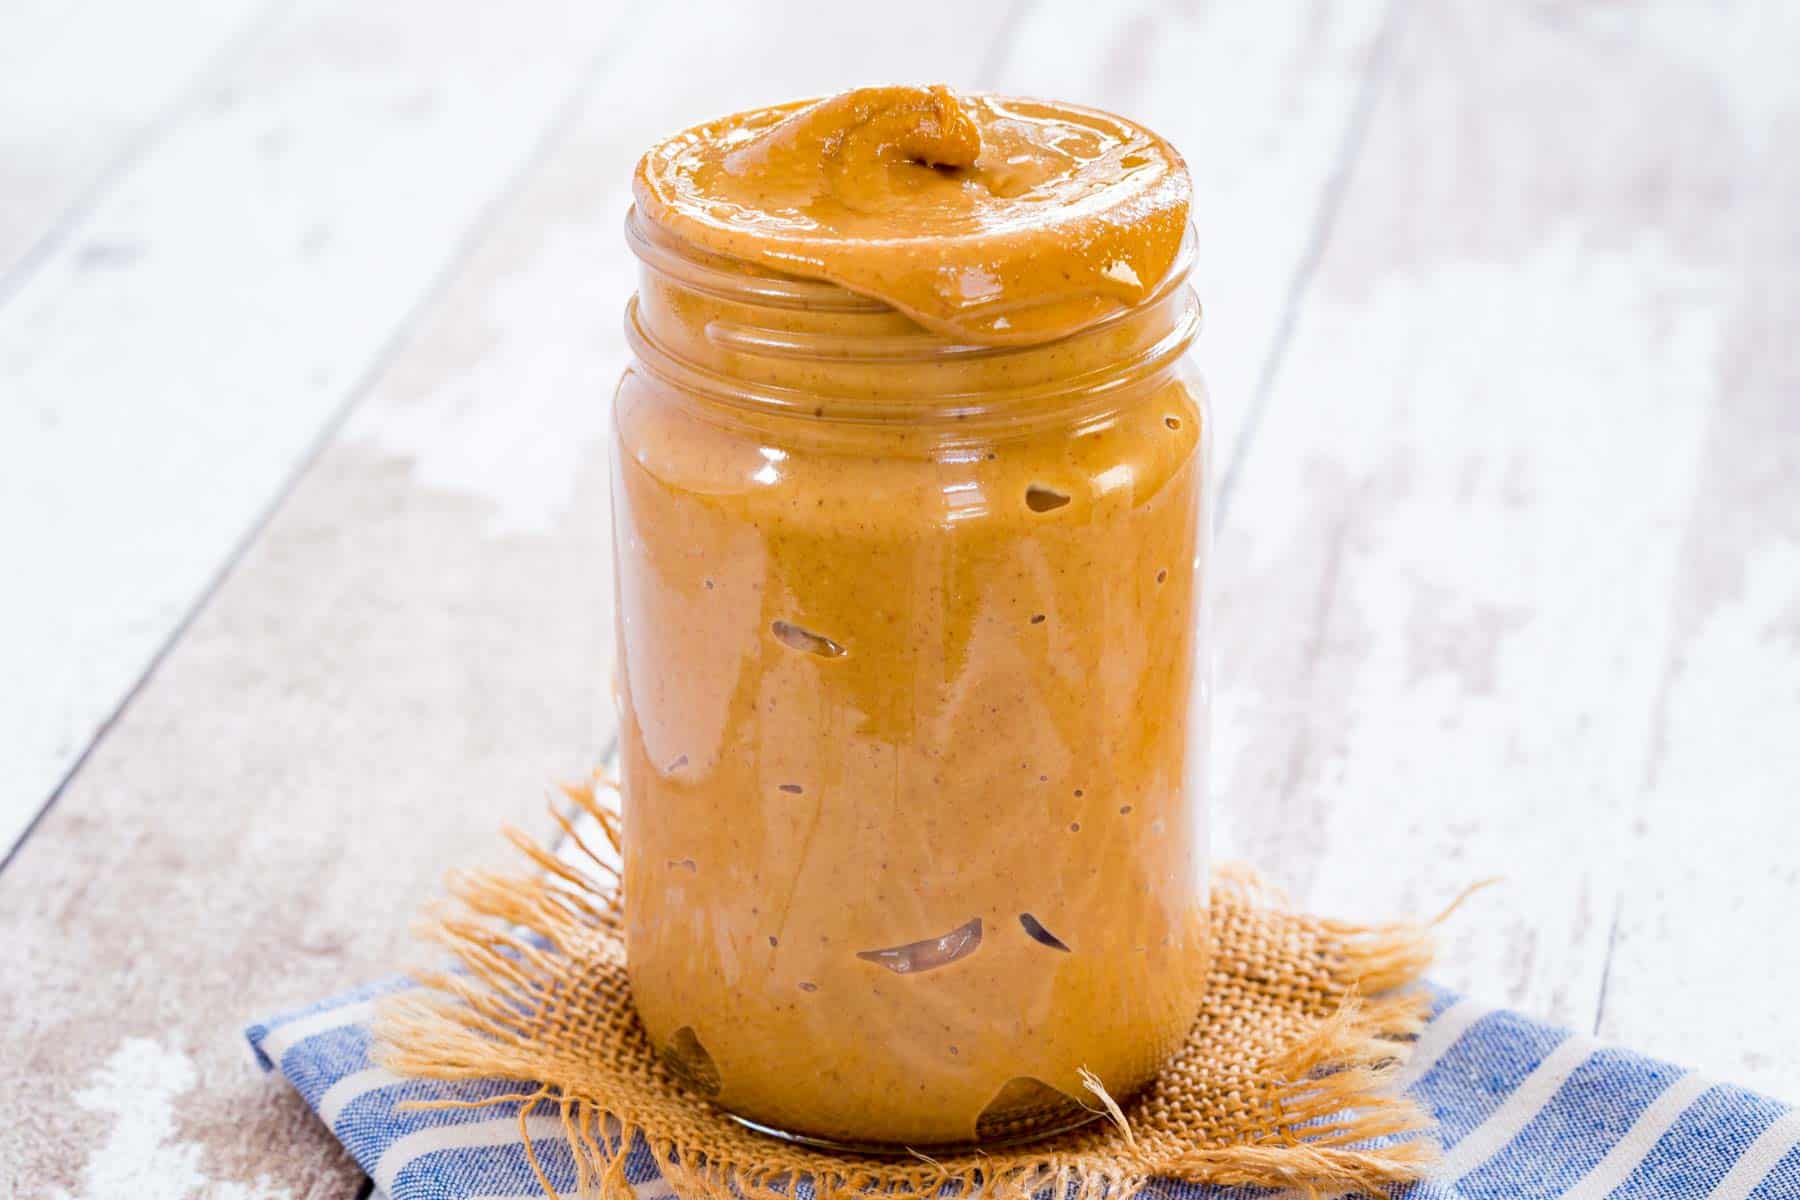 A jar of peanut butter with some dripping over the side.